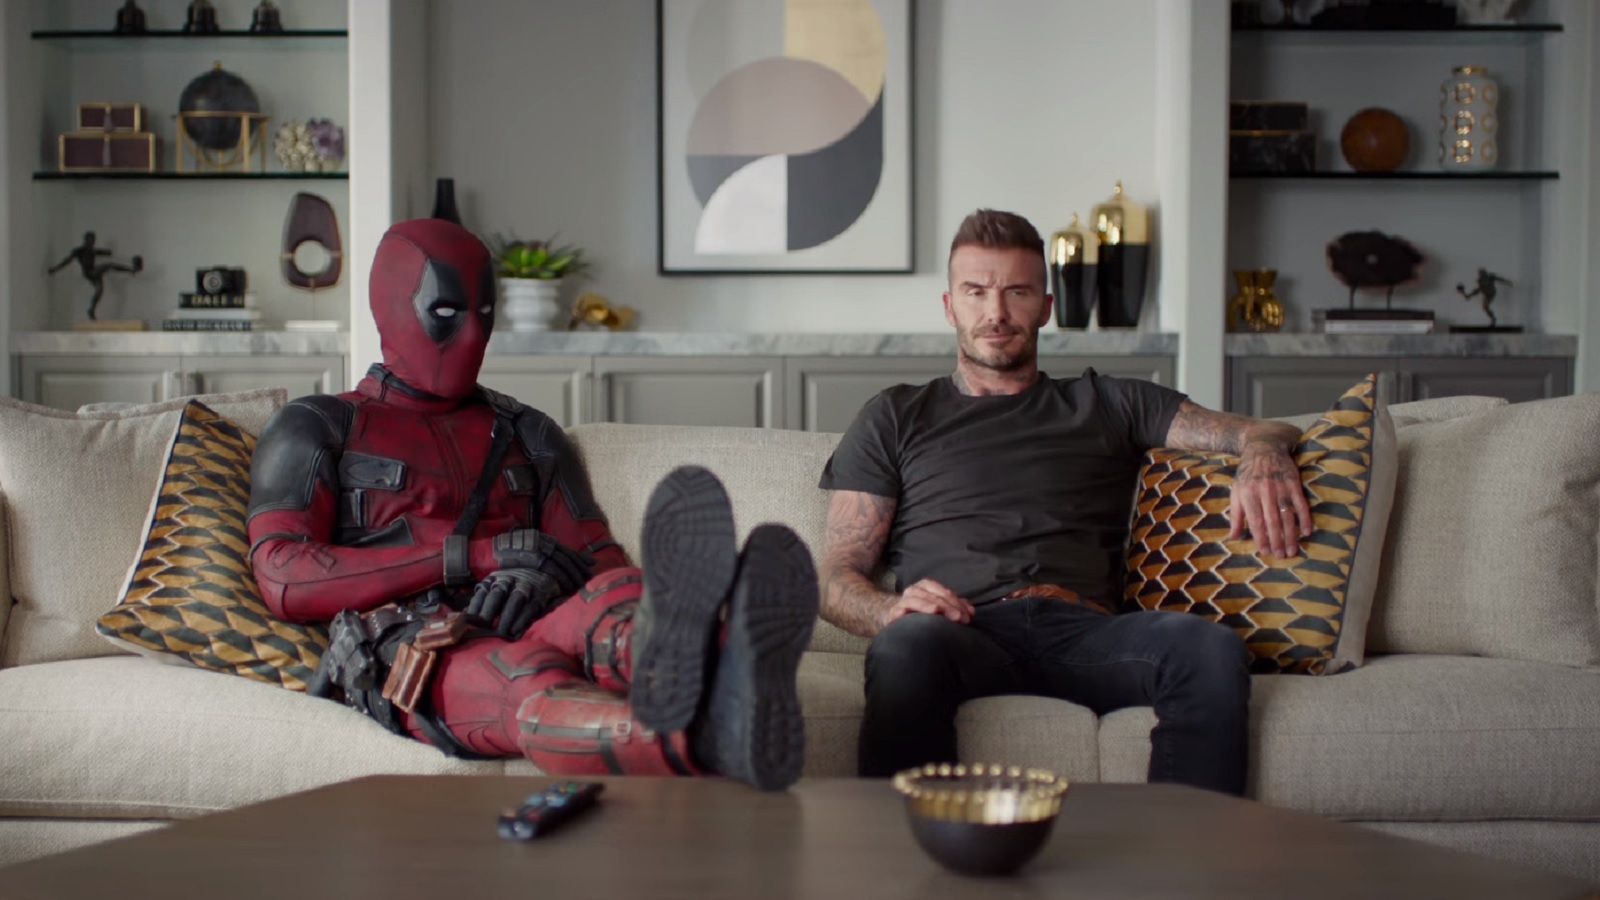 Deadpool Apologizes to Beckham for Making Fun of His Voice